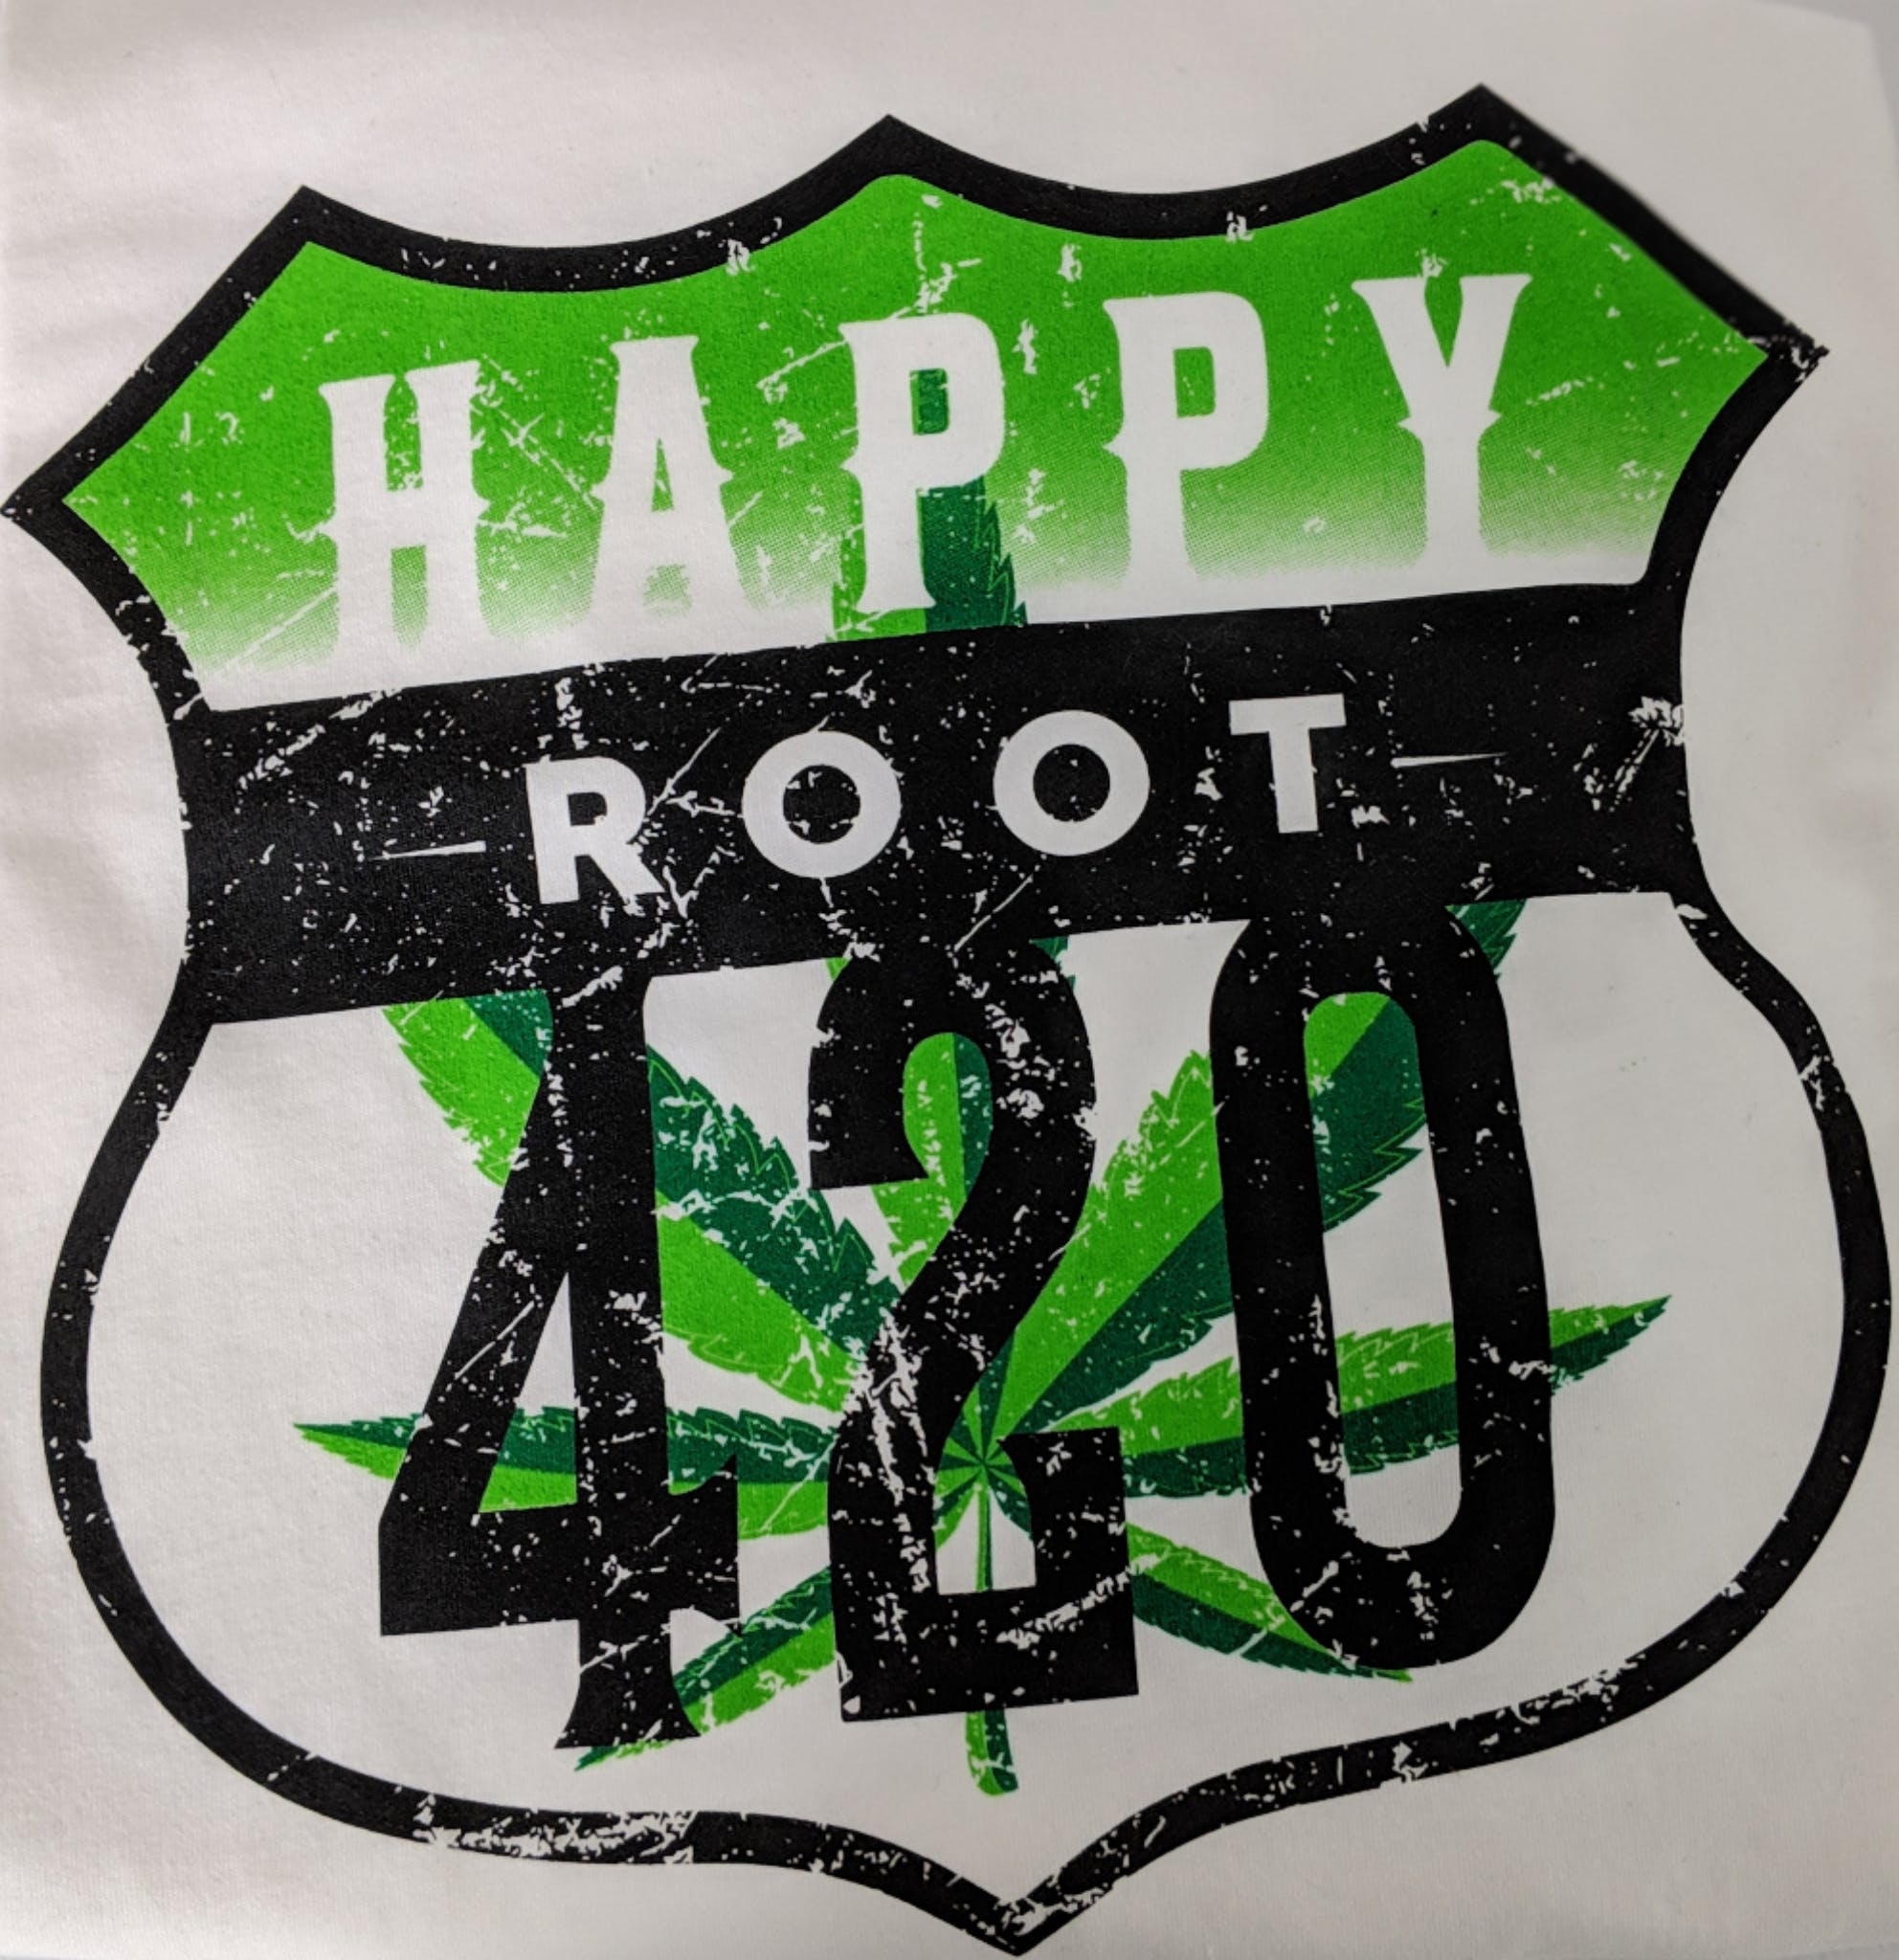 gear-happy-root-t-shirts